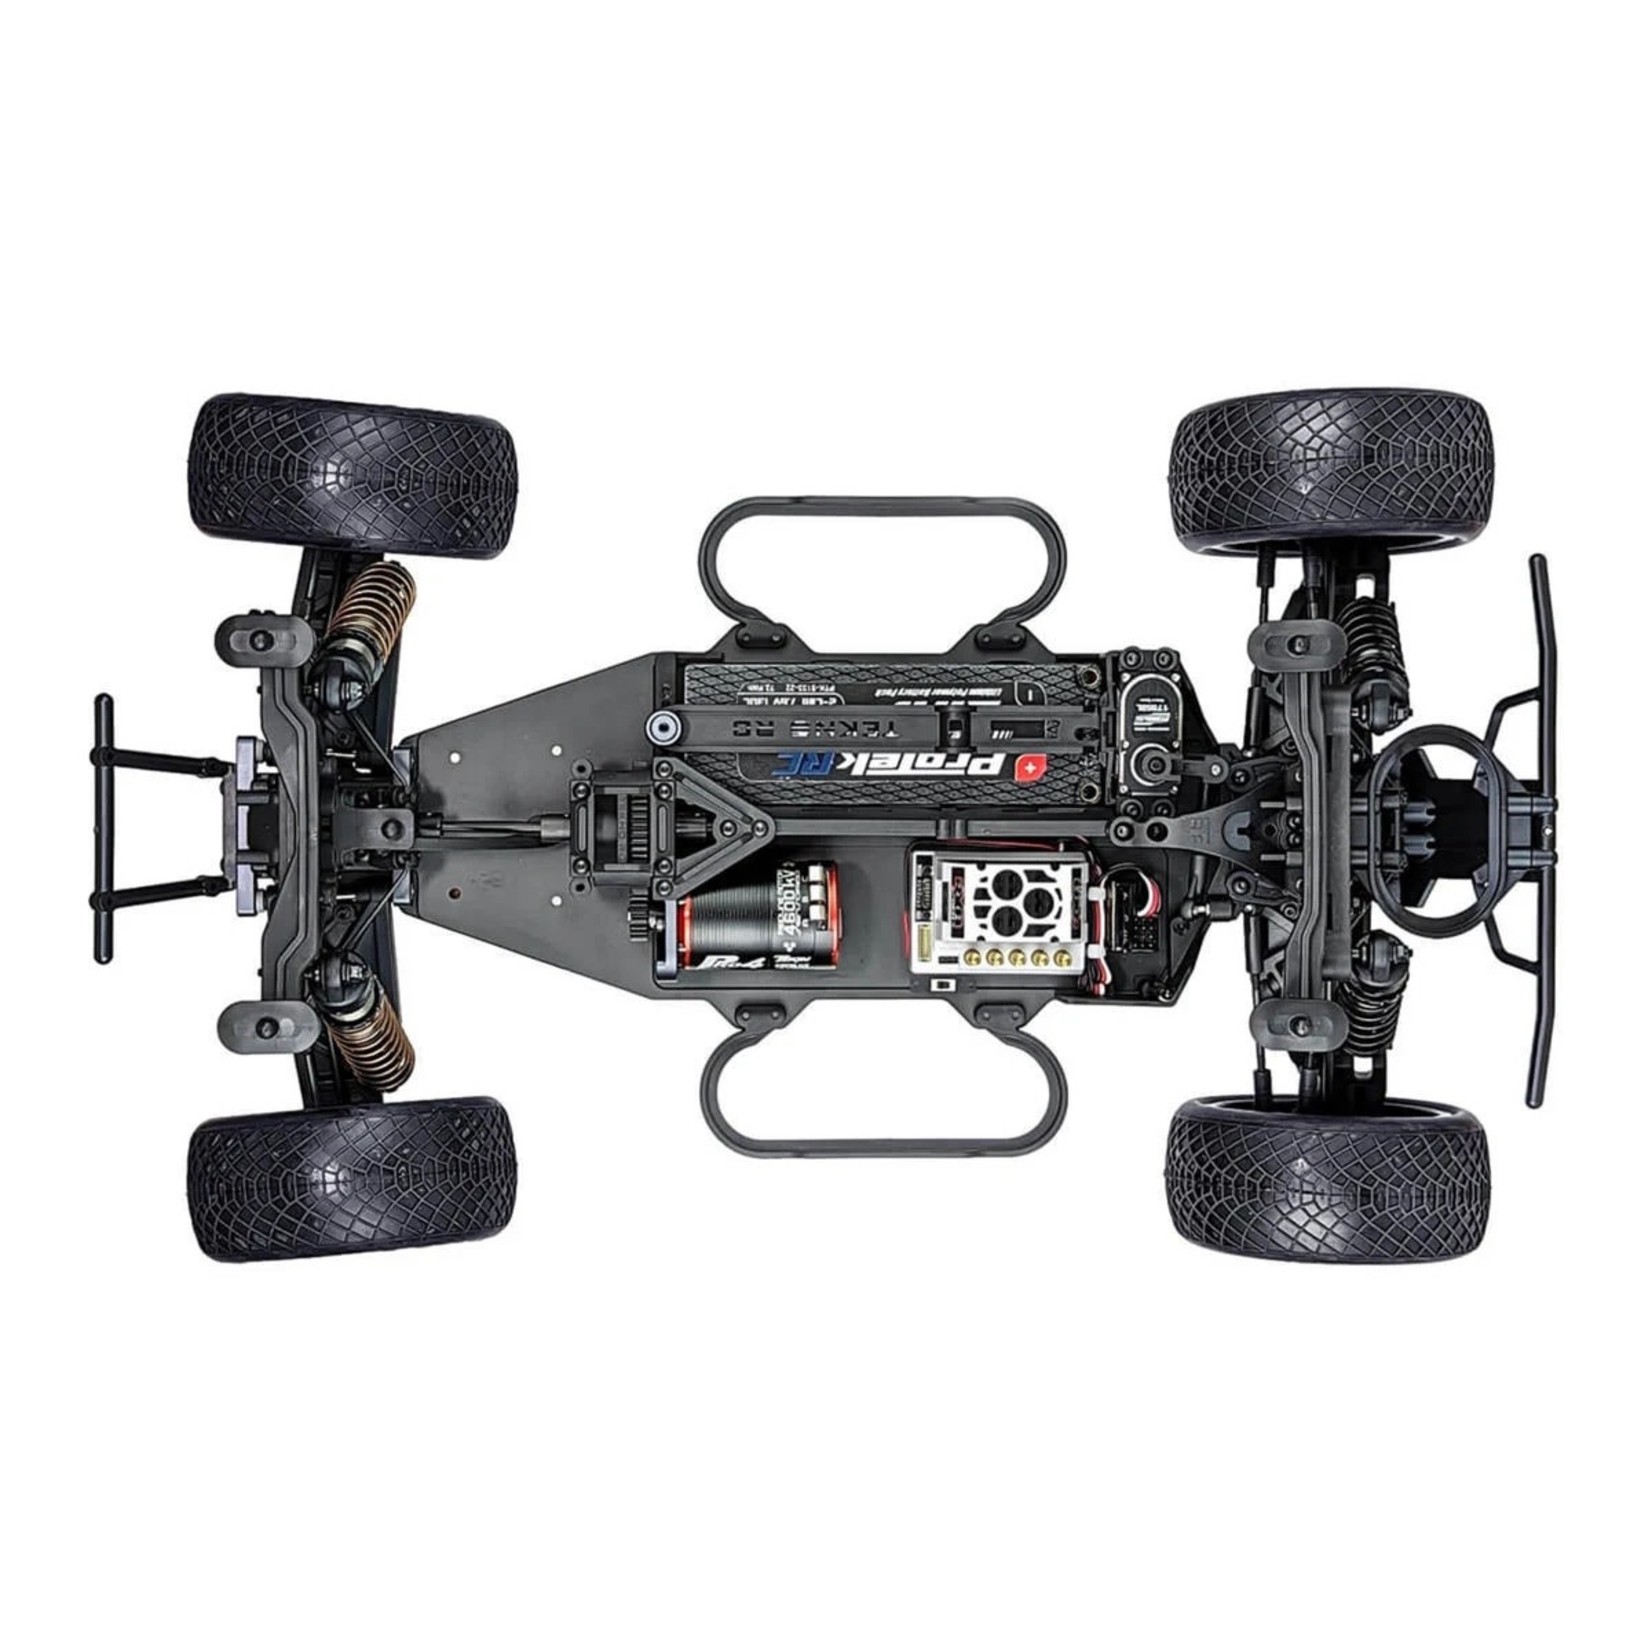 Tekno RC Tekno RC SCT410SL Lightweight 1/10 Electric 4WD Short Course Truck Kit #TKR7000